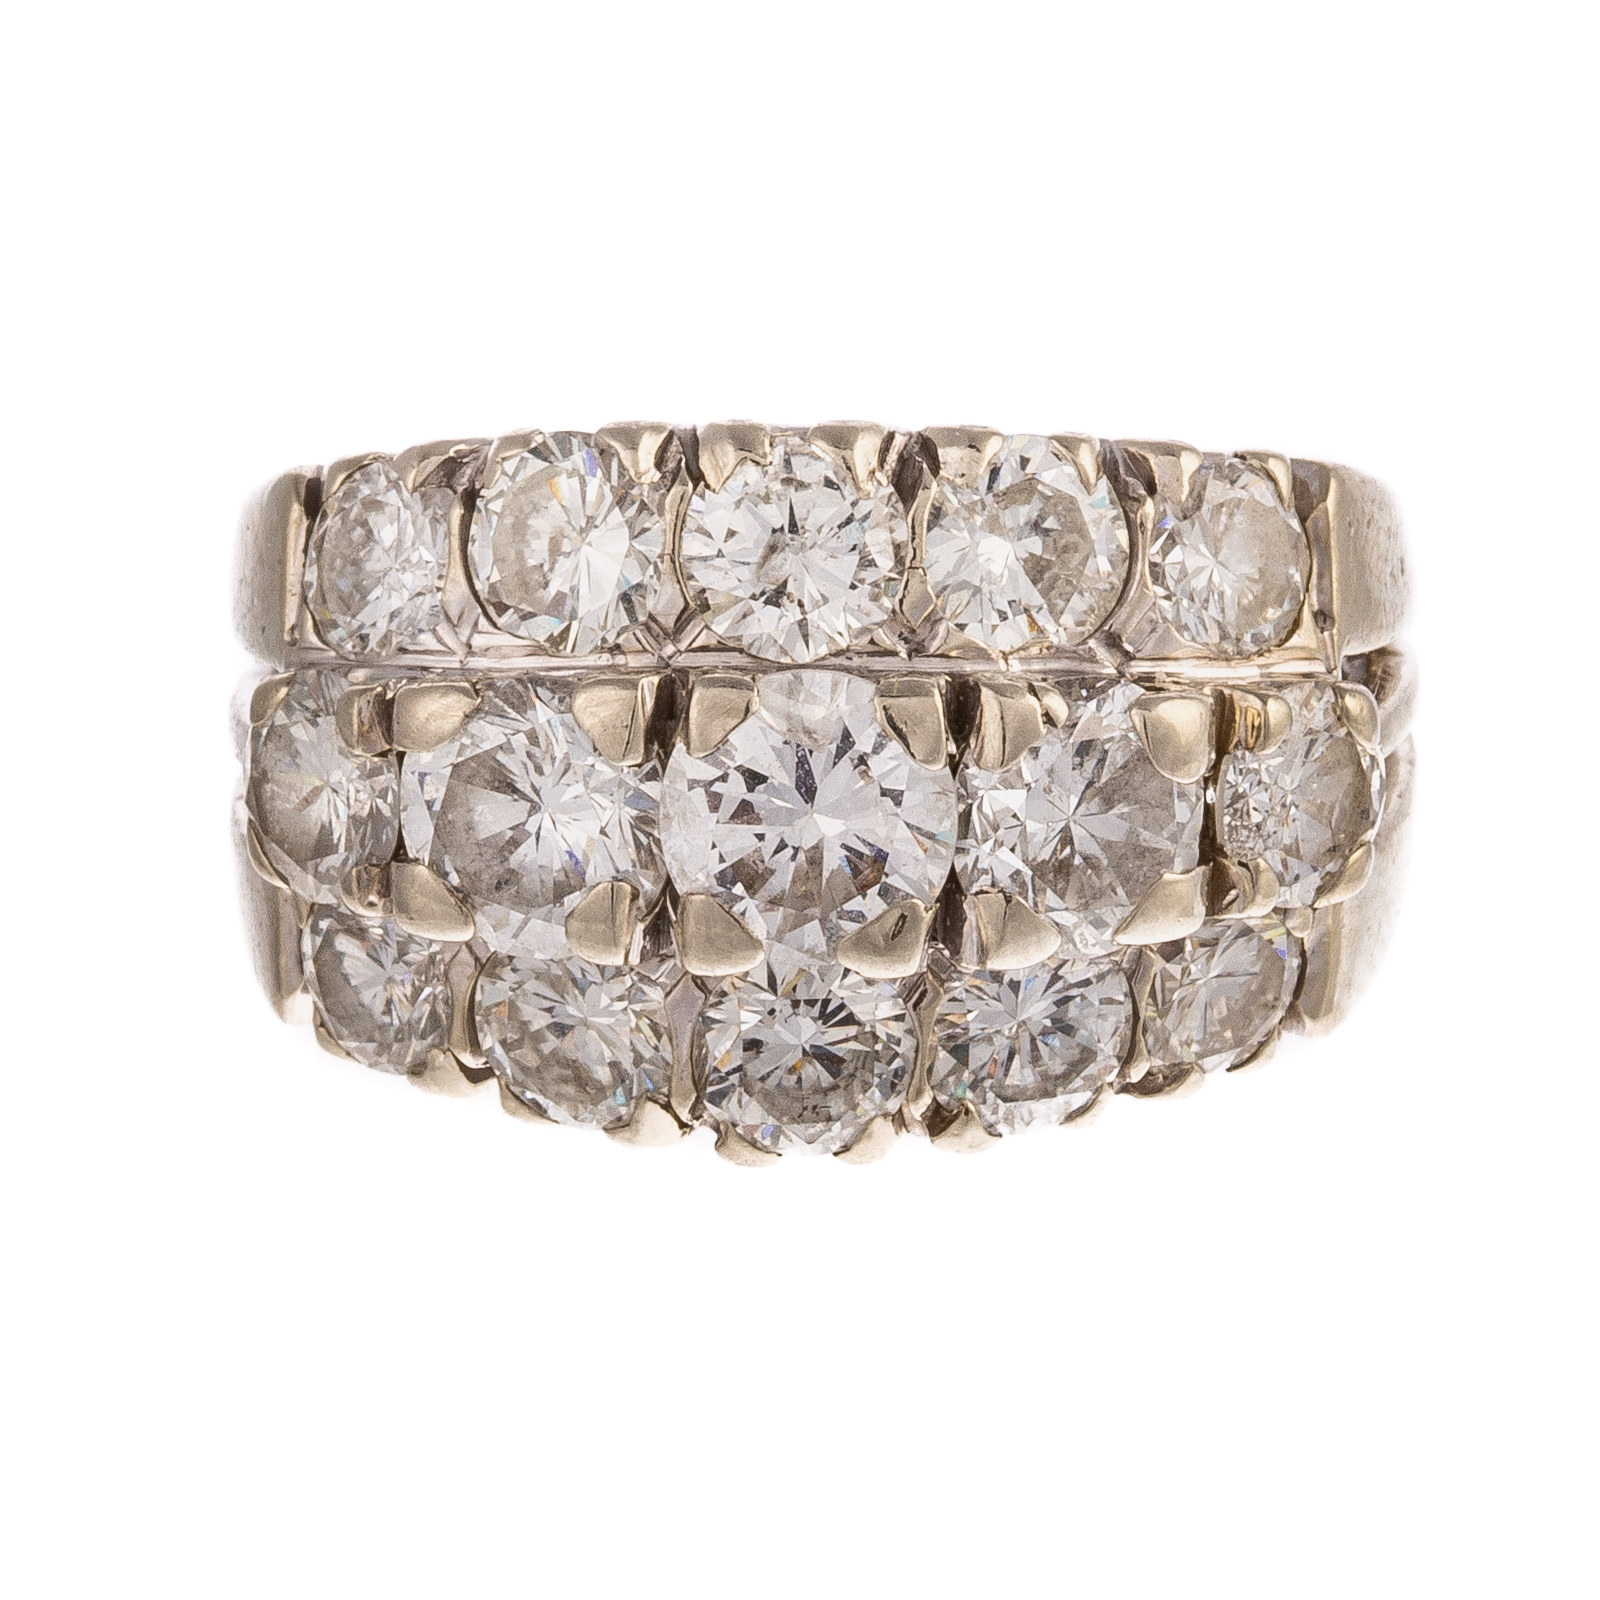 A WIDE 4.00 CTW DIAMOND BAND IN